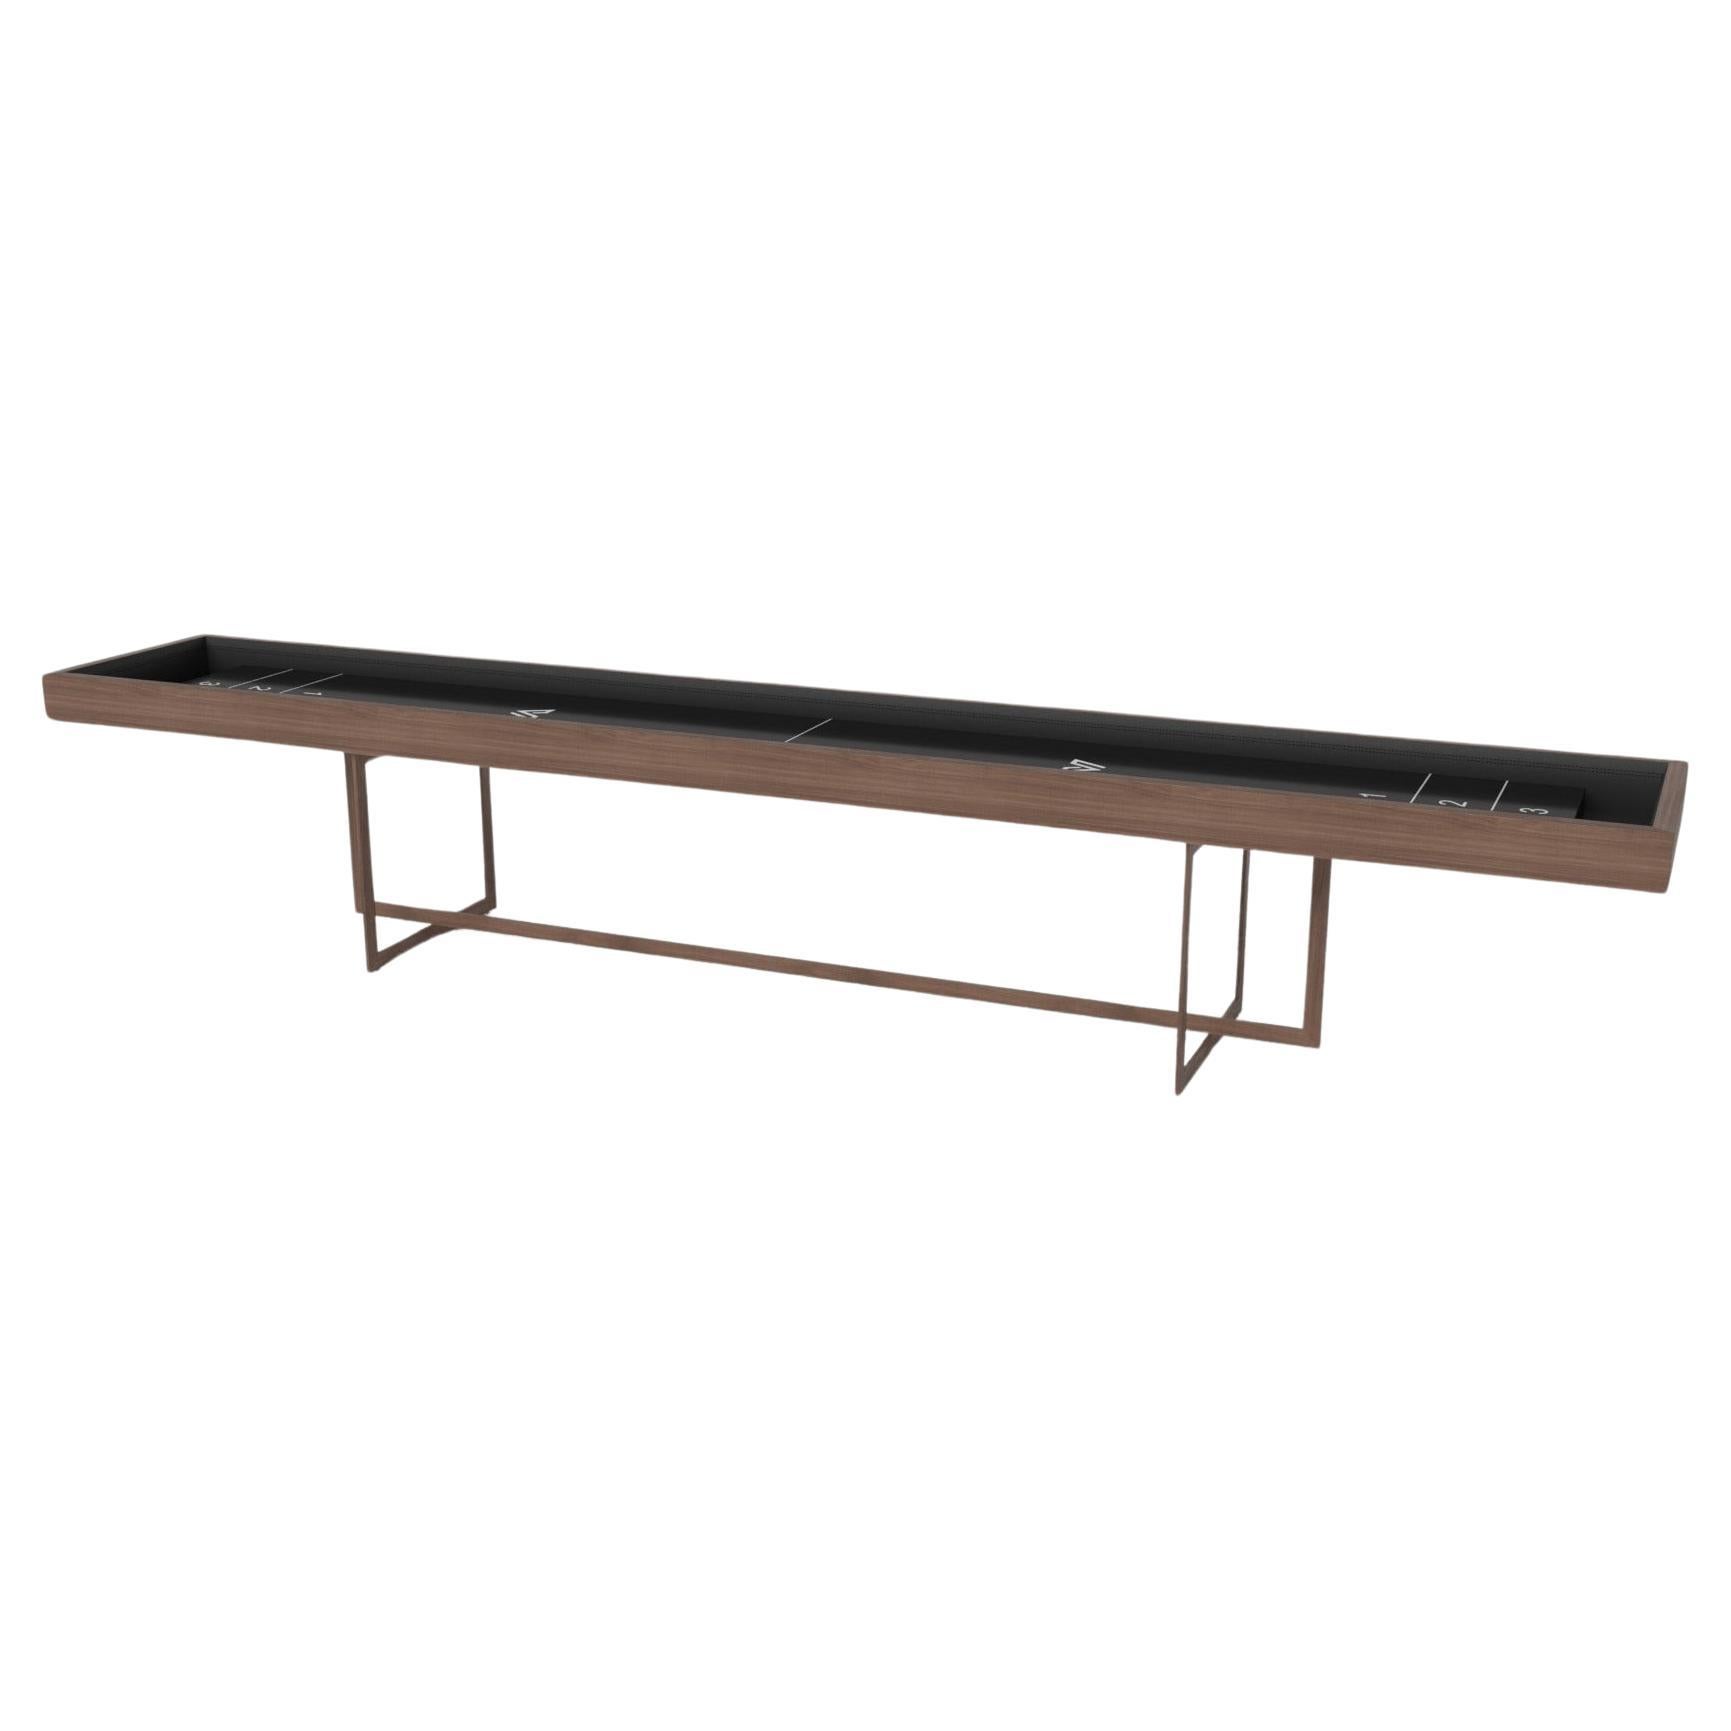 Elevate Customs Beso Shuffleboard Tables / Solid Walnut Wood in 9' - Made in USA